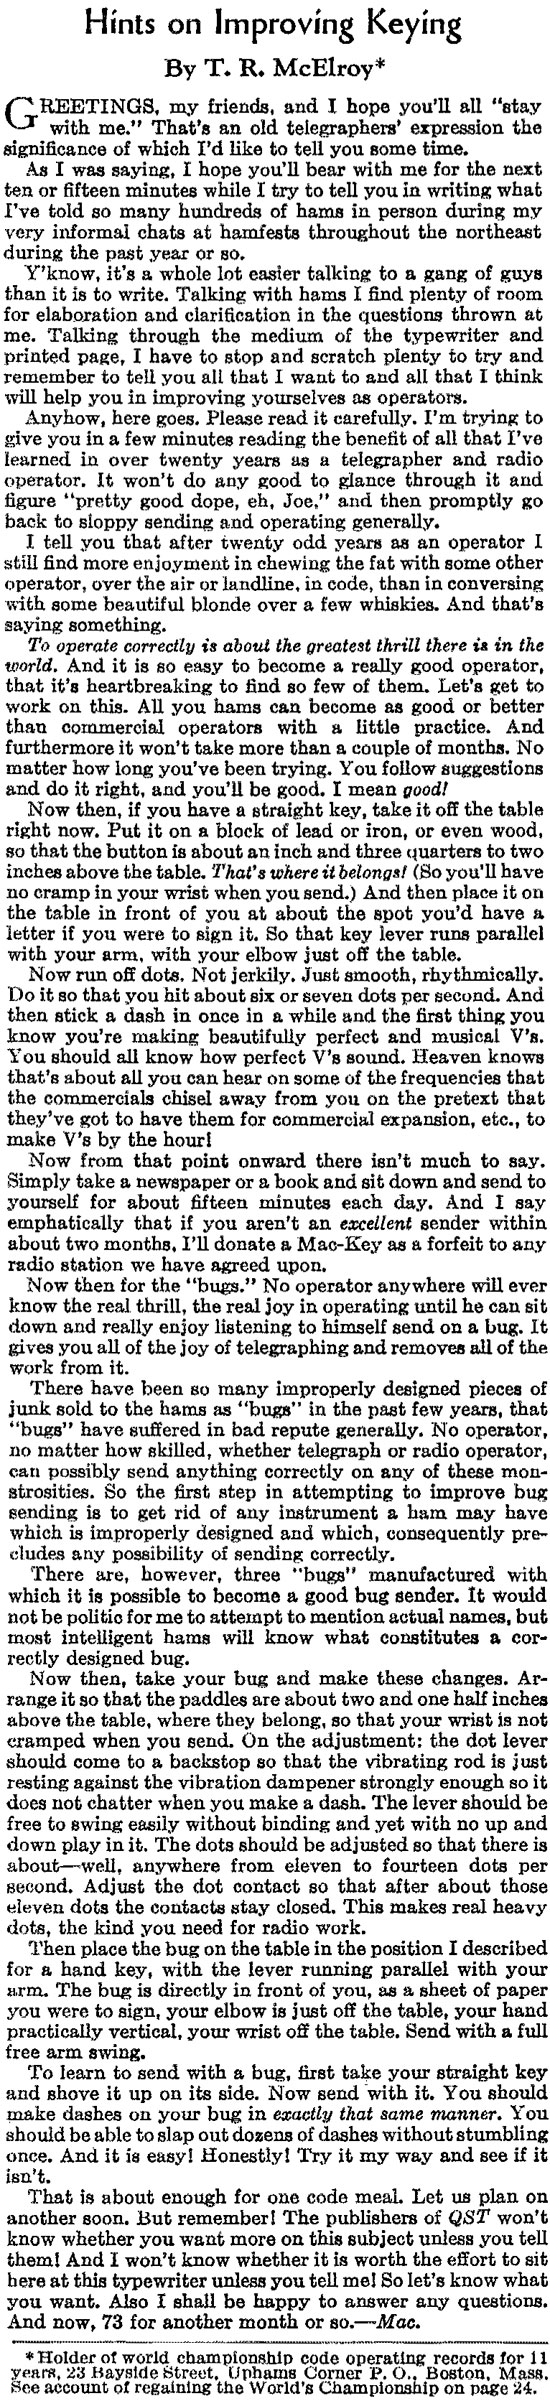 McElroy's article from QST, November 1935 - sorry, this is only a scan of a magazine page so not machine readable